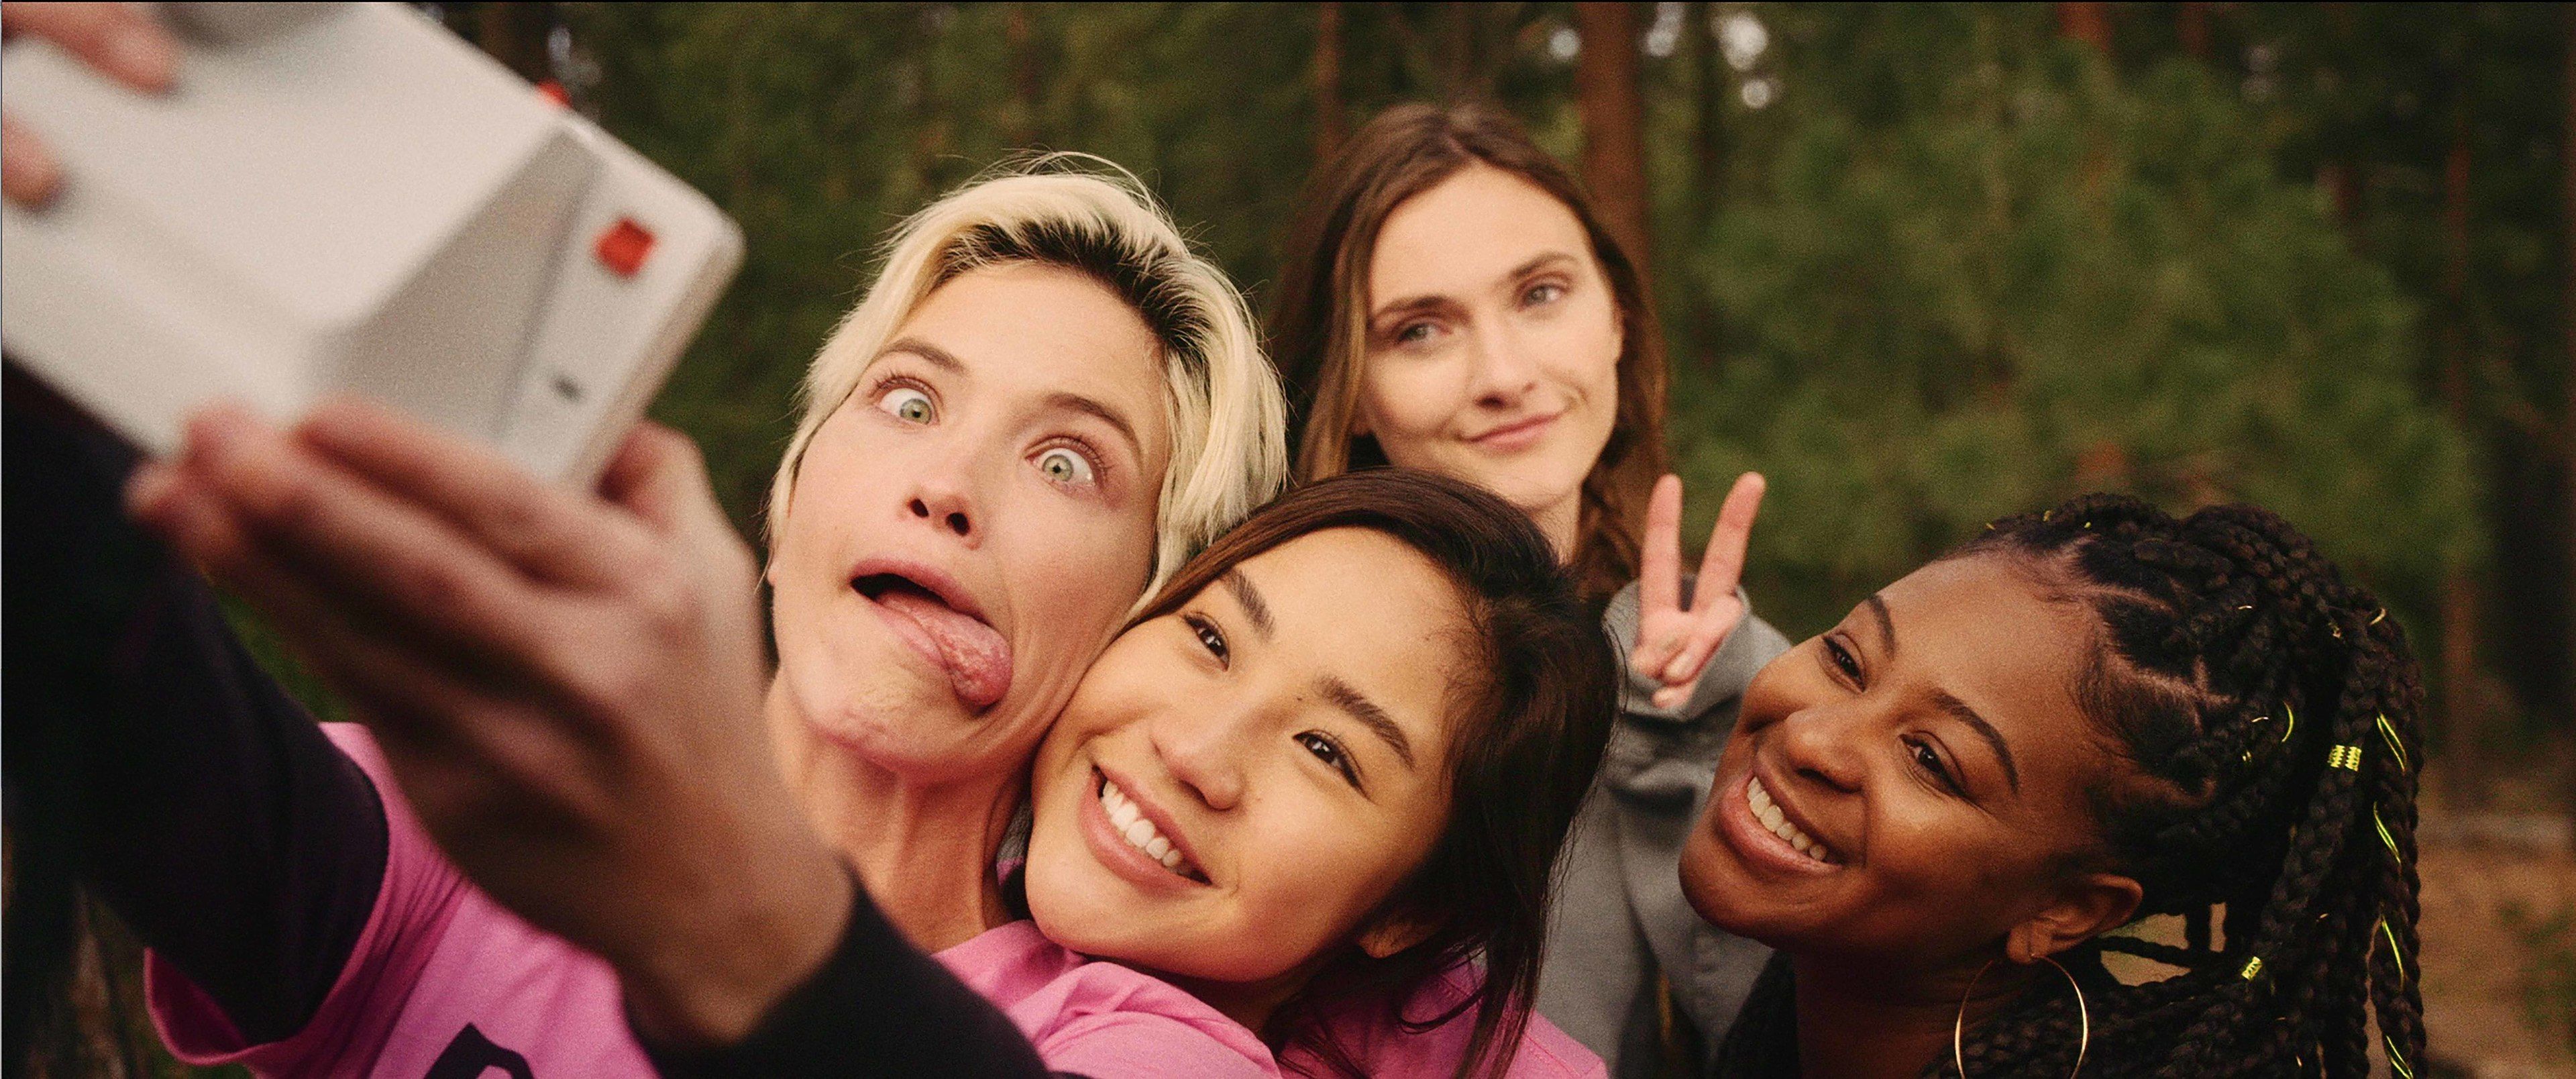 Four women smile at the camera while taking a selfie.